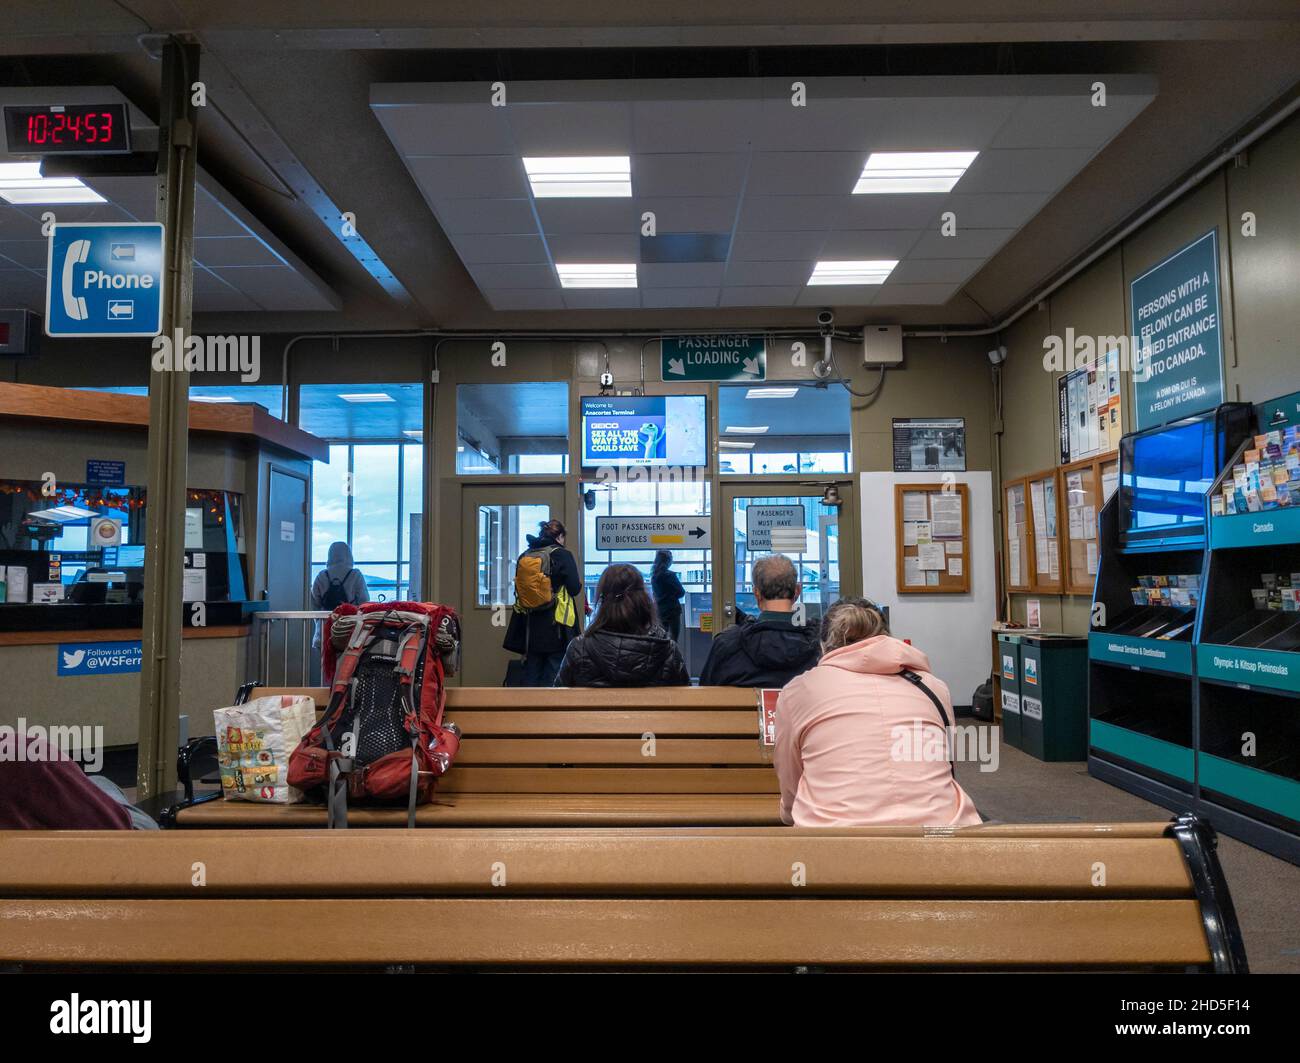 Anacortes, WA USA - circa November 2021: View of people sitting and standing, waiting for the arrival of a Washington State Ferry in the lobby. Stock Photo